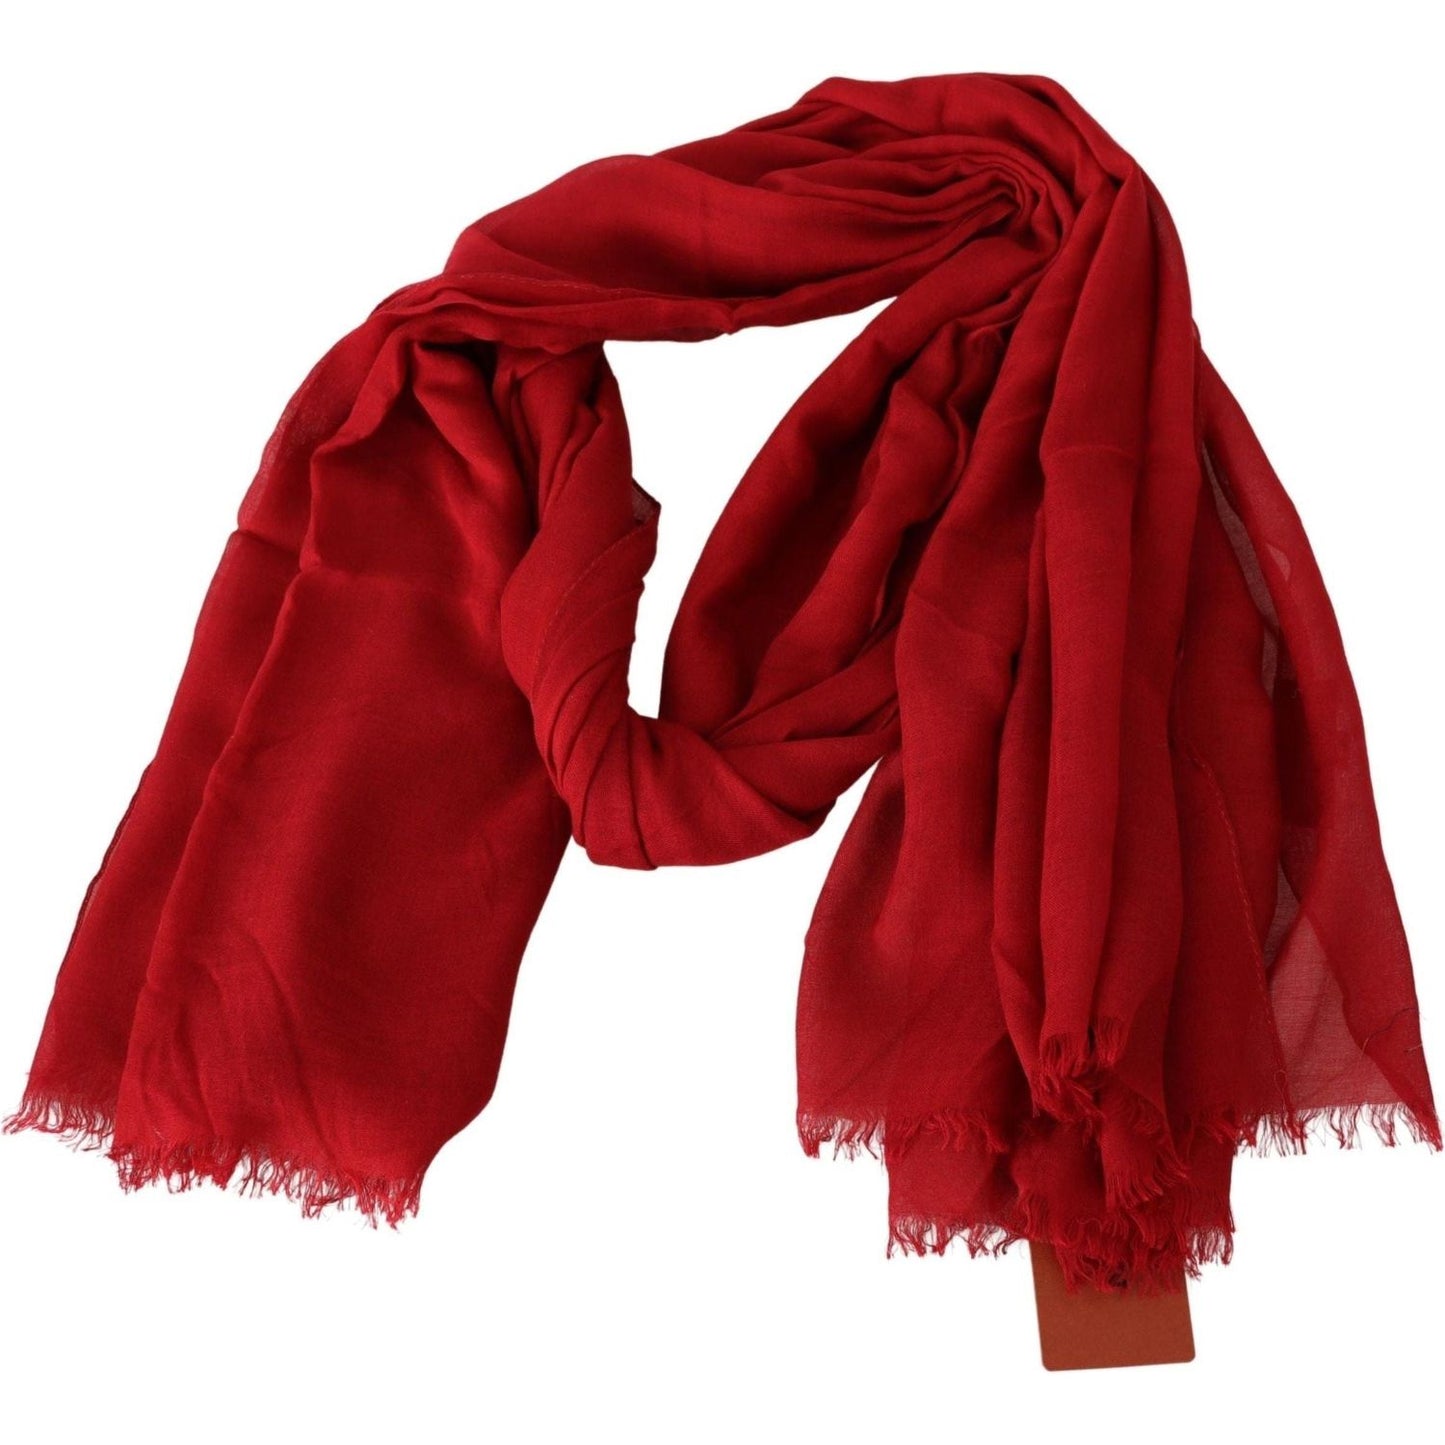 Missoni Luxurious Cashmere Patterned Scarf red-cashmere-unisex-neck-wrap-fringes-scarf